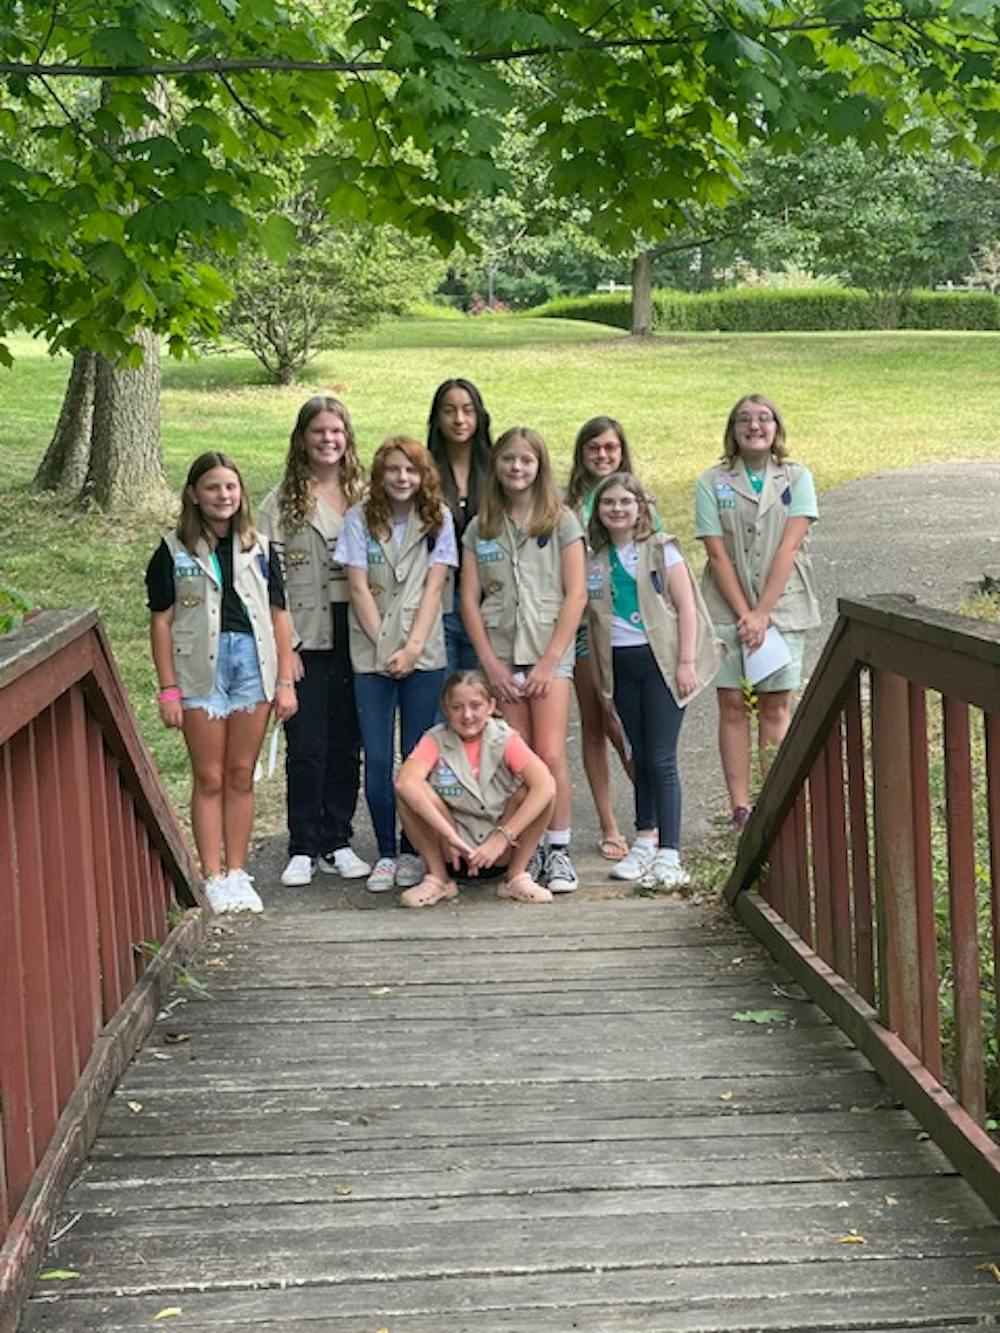 Girl scout troop 42058 poses for a photo in their vests. ﻿